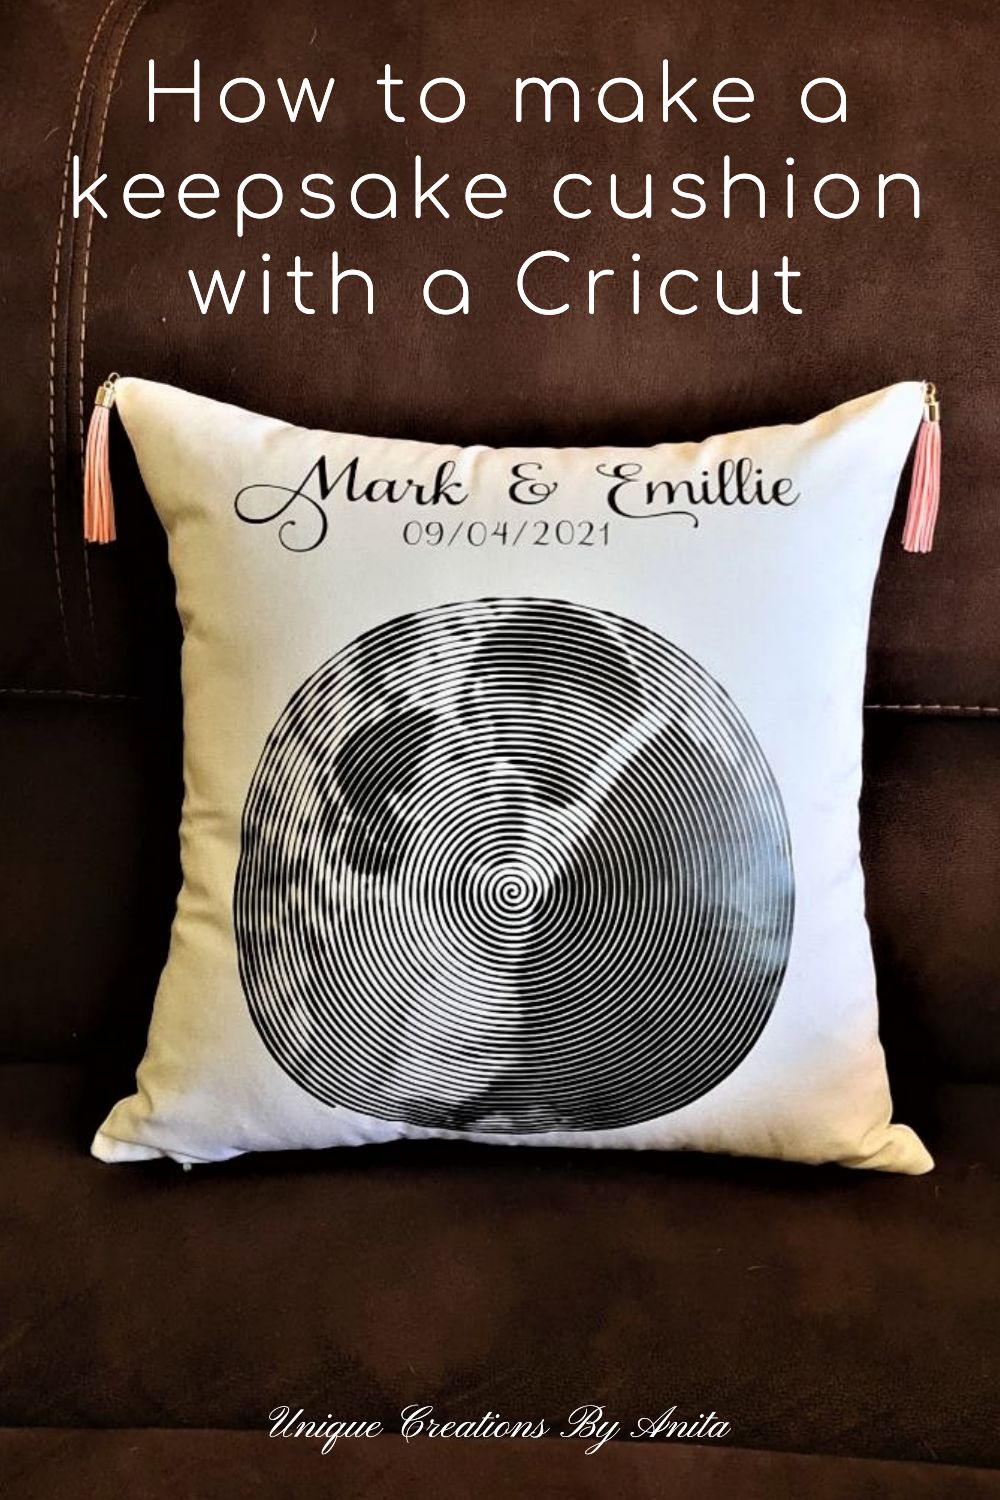 Who would not loved a personalized cushion to remember their wedding day or other special days.